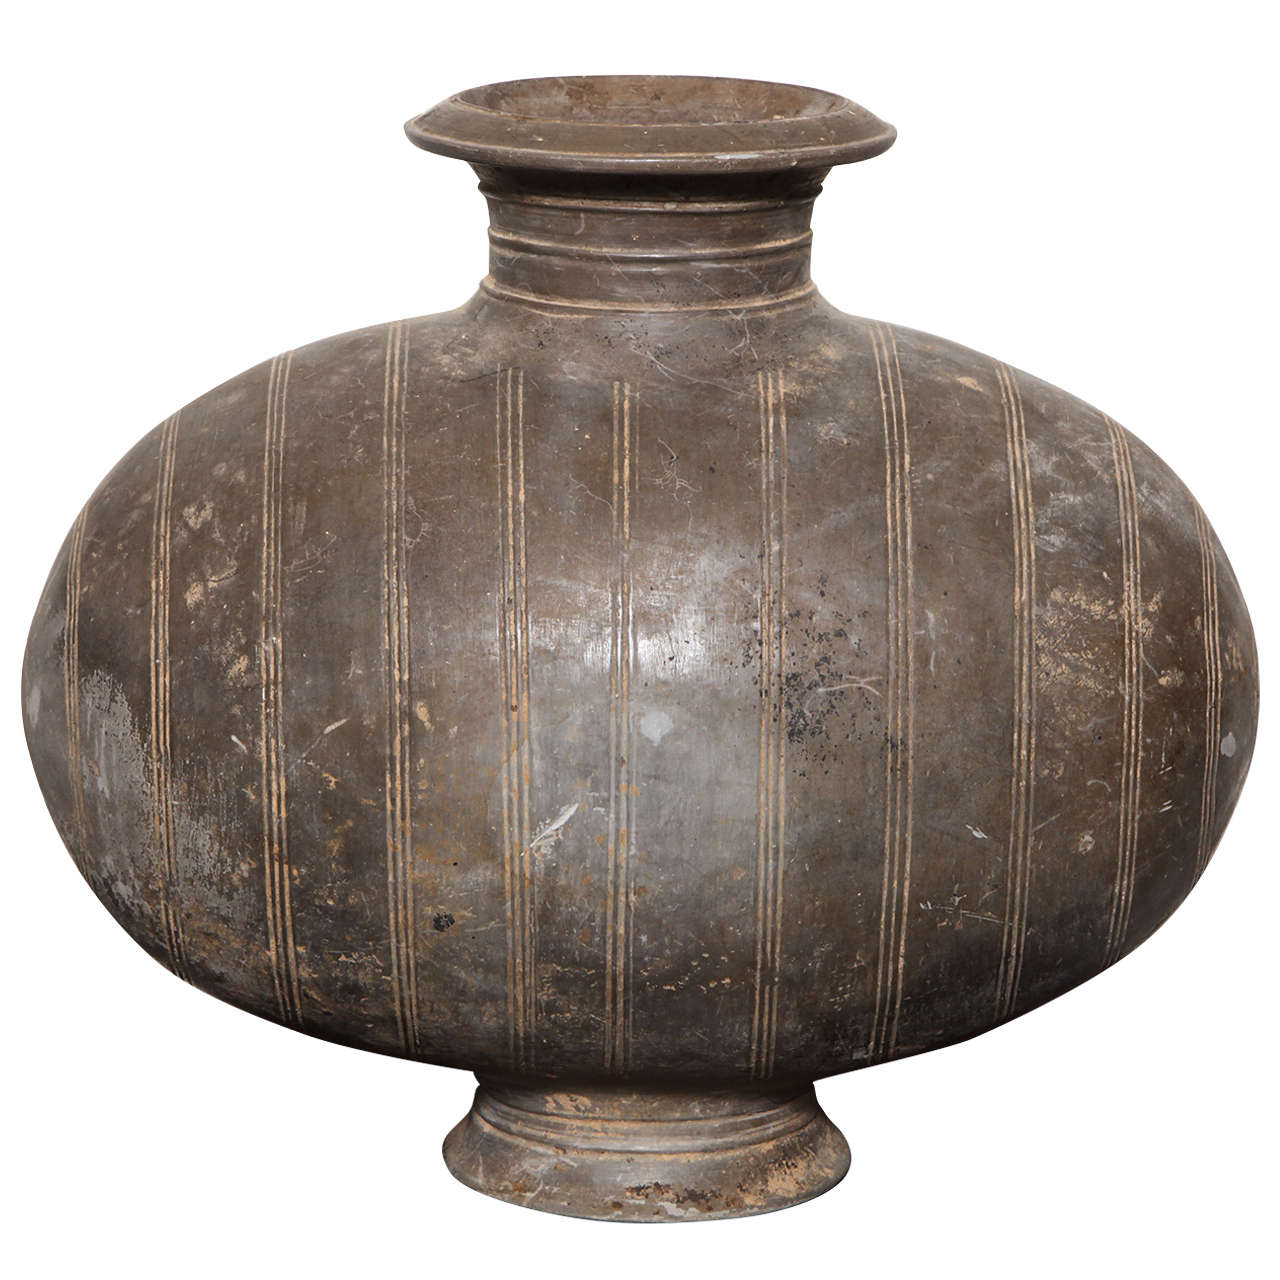 Western Han Dynasty Terracotta Cocoon Jar with Incised Bands from China